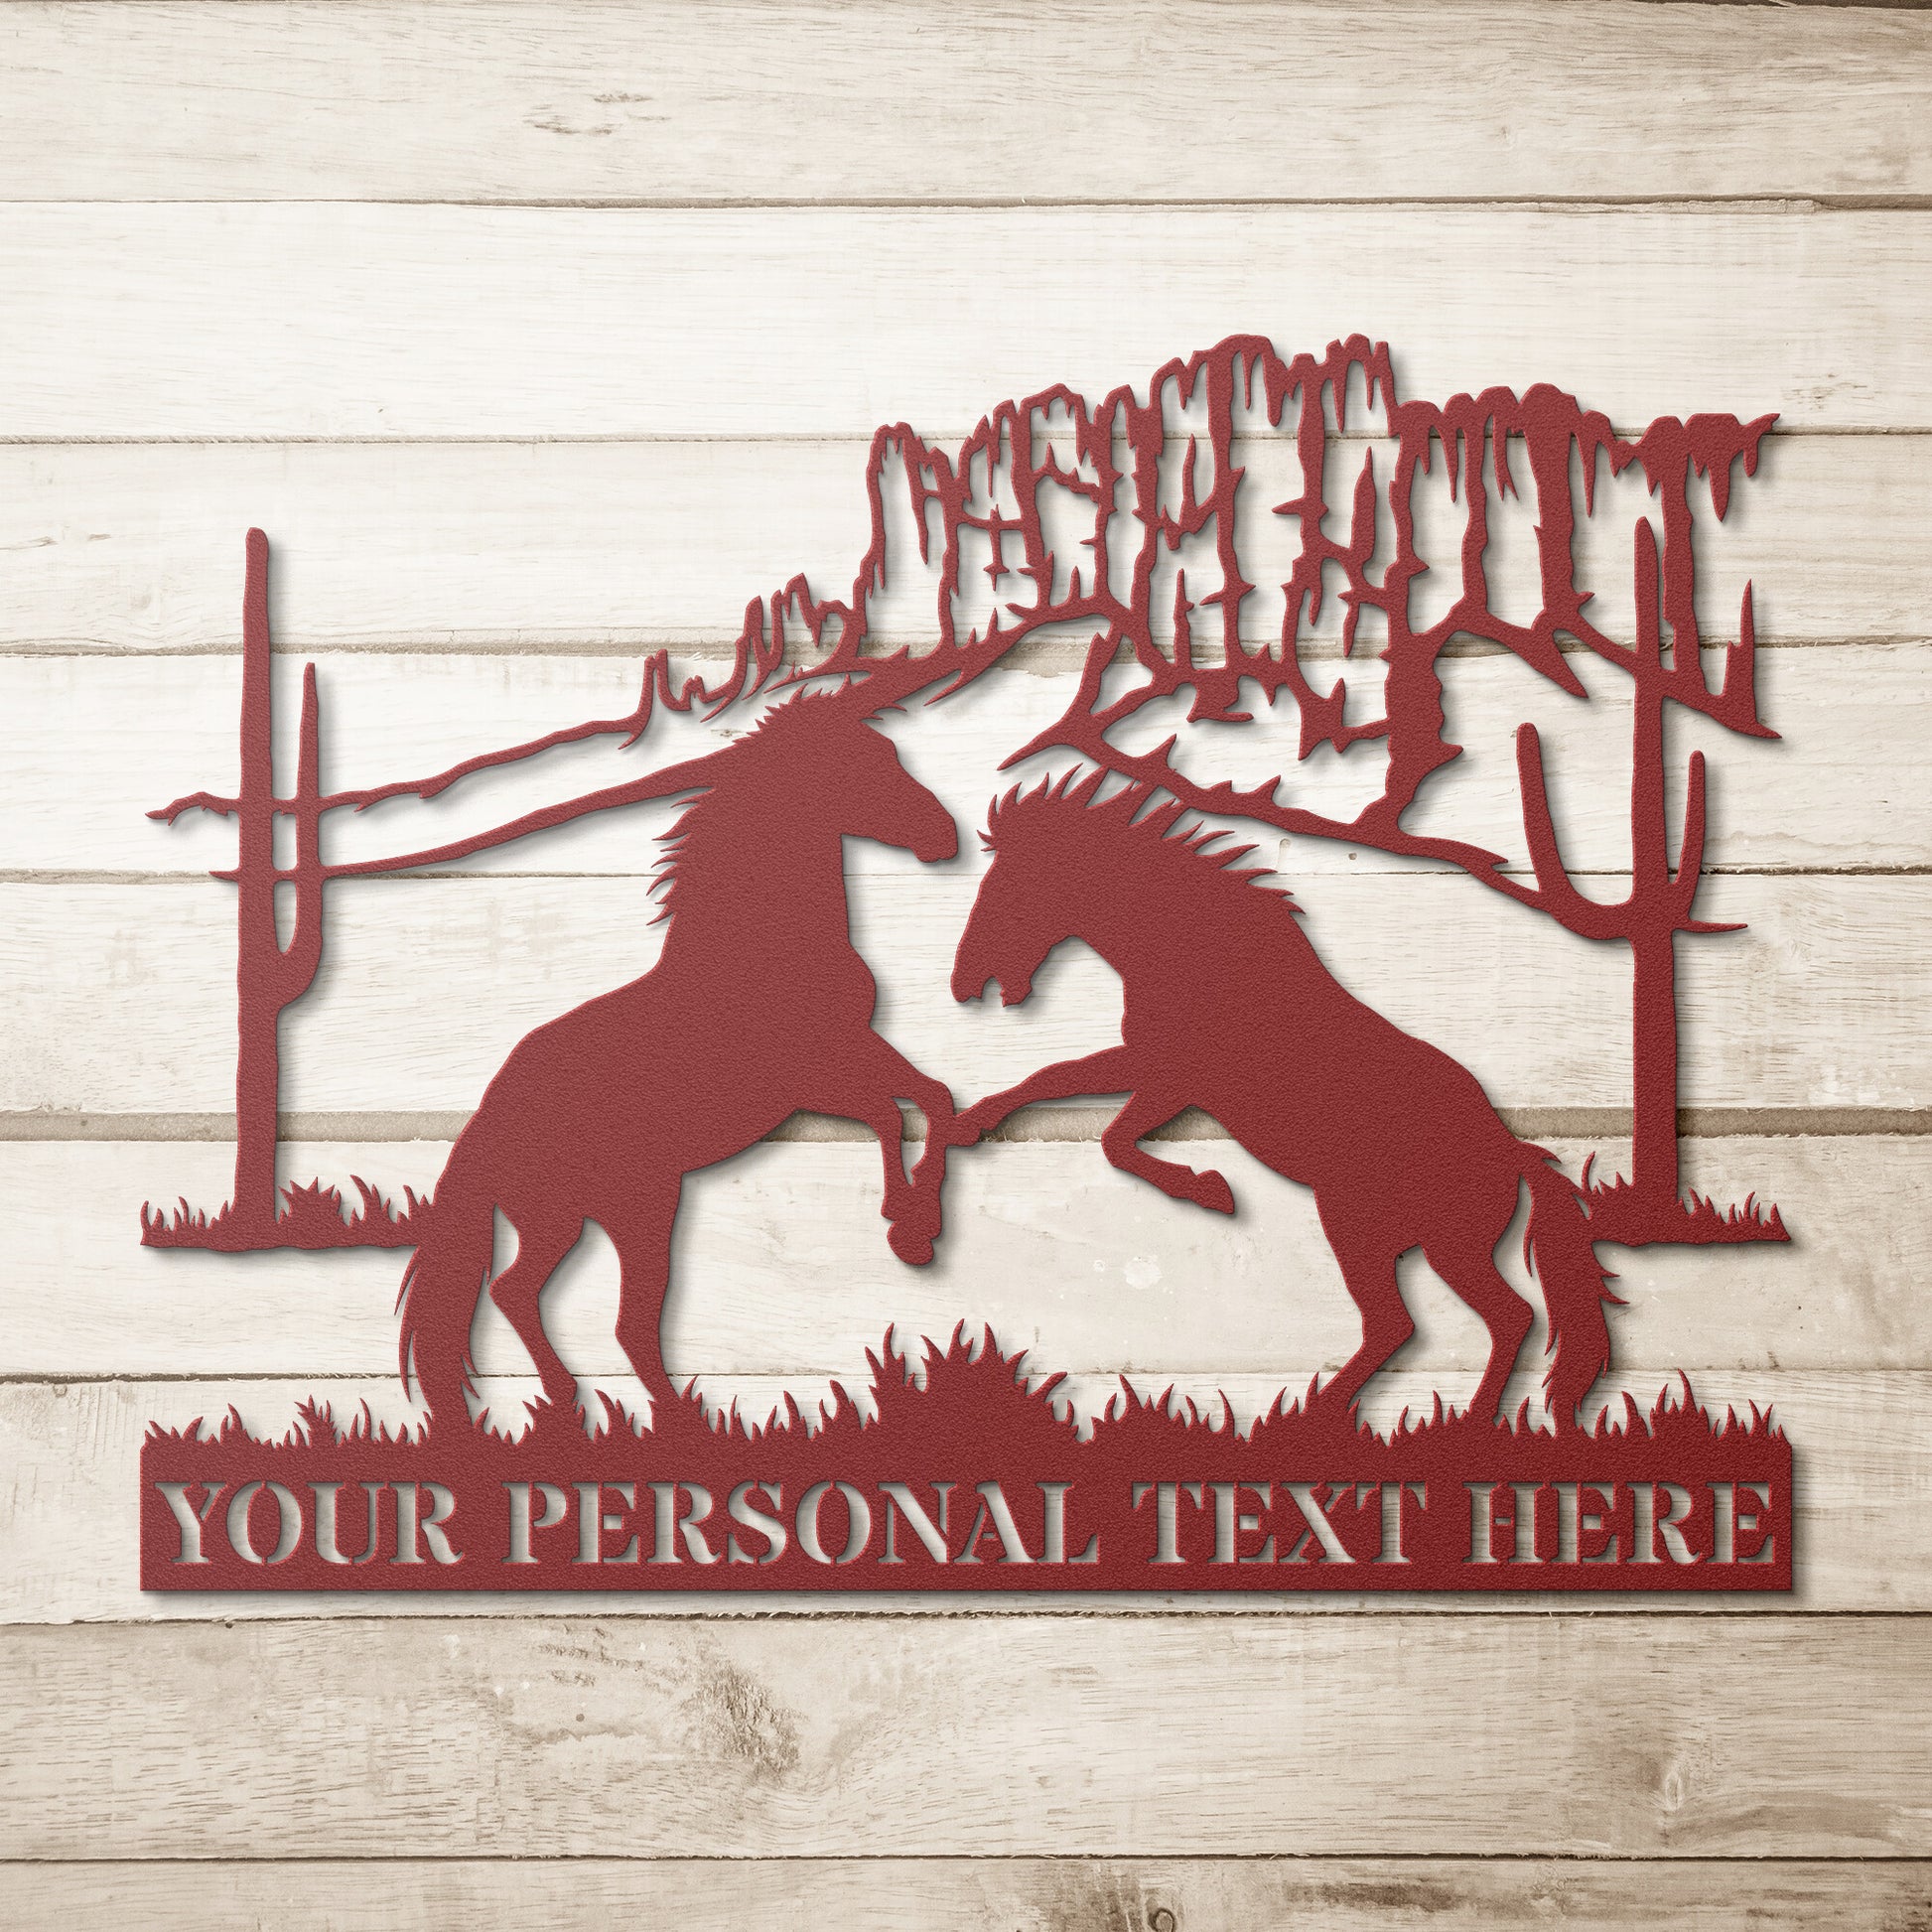 Personalized Nature Horses Name Metal Sign Gift. Custom Horse Scenery Wall Decor. Nature Wall Art. Horse Steel Sign Monogram. Wall Hanging